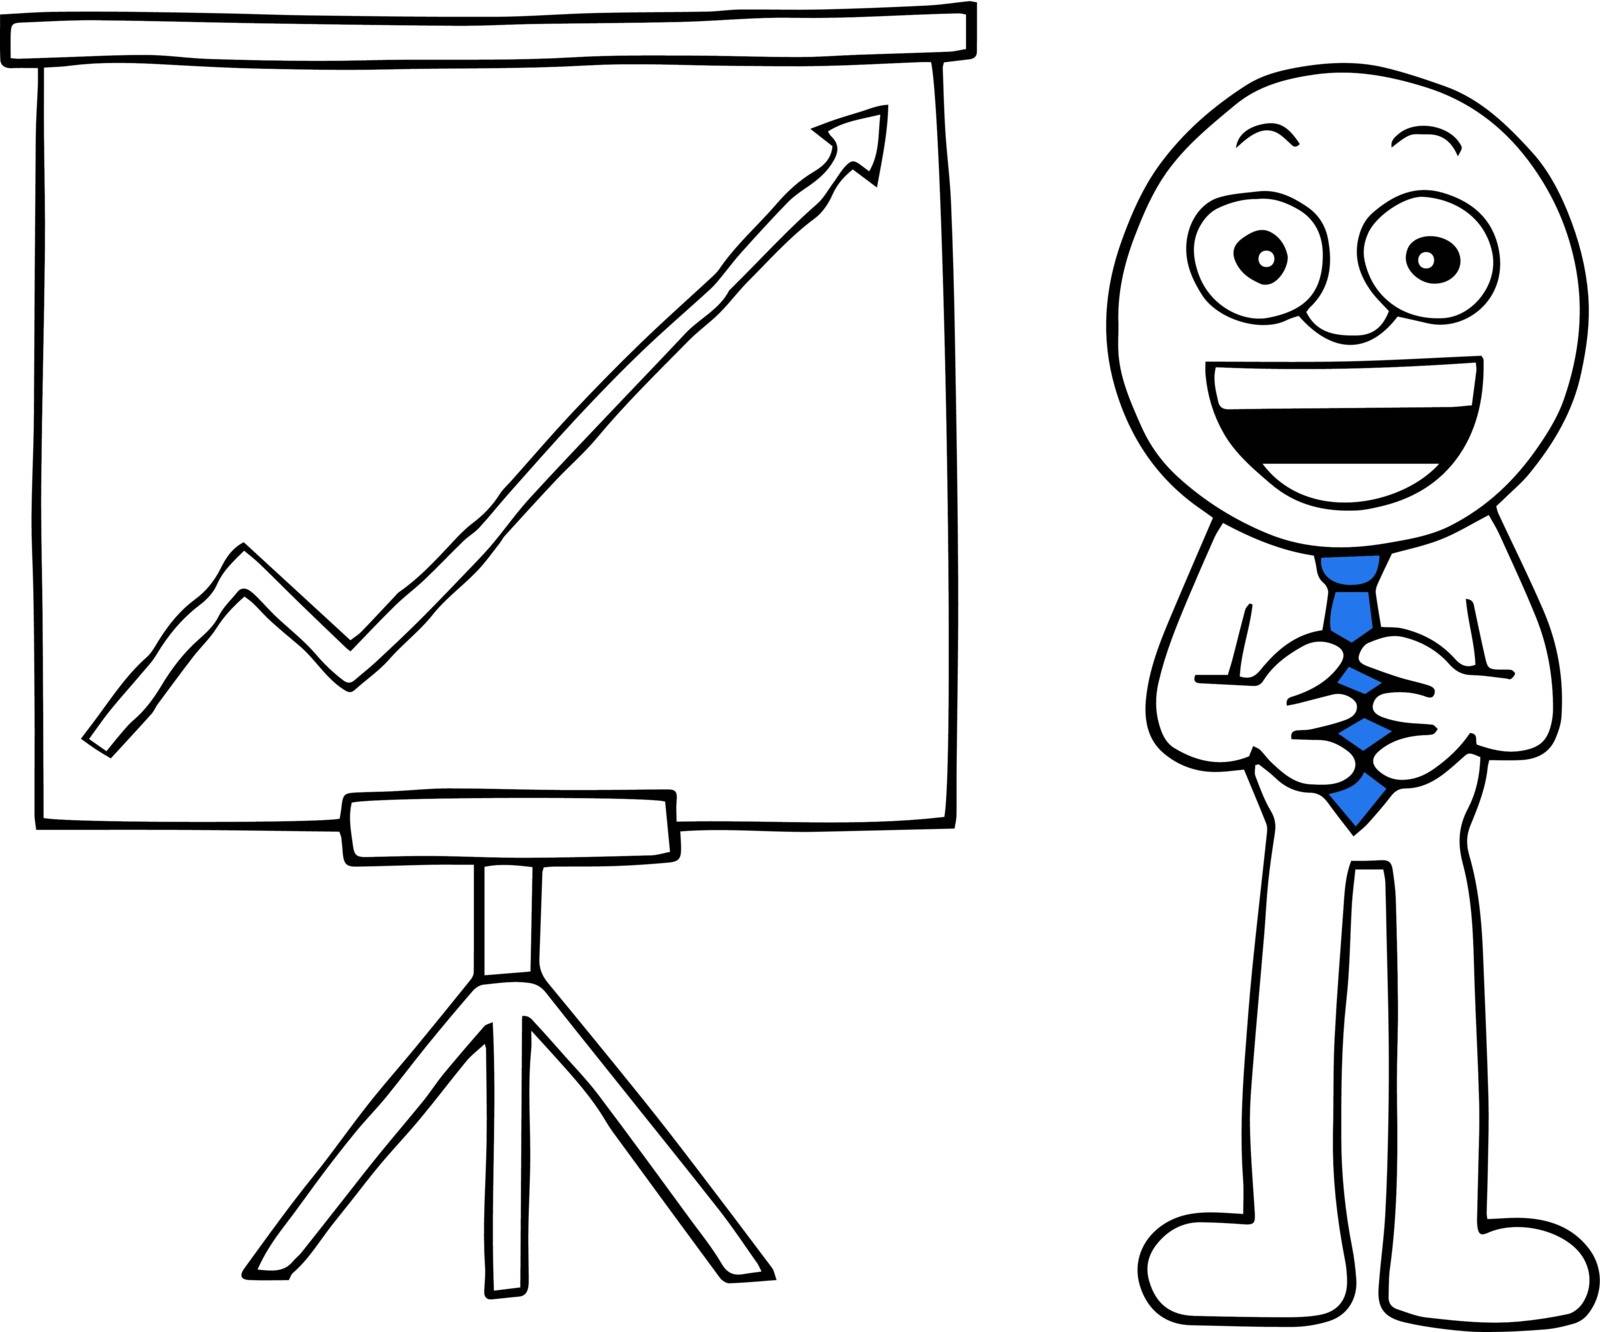 Hand drawn cartoon happy businessman hands together beside standing sales chart with arrow going up symbolizing profit.